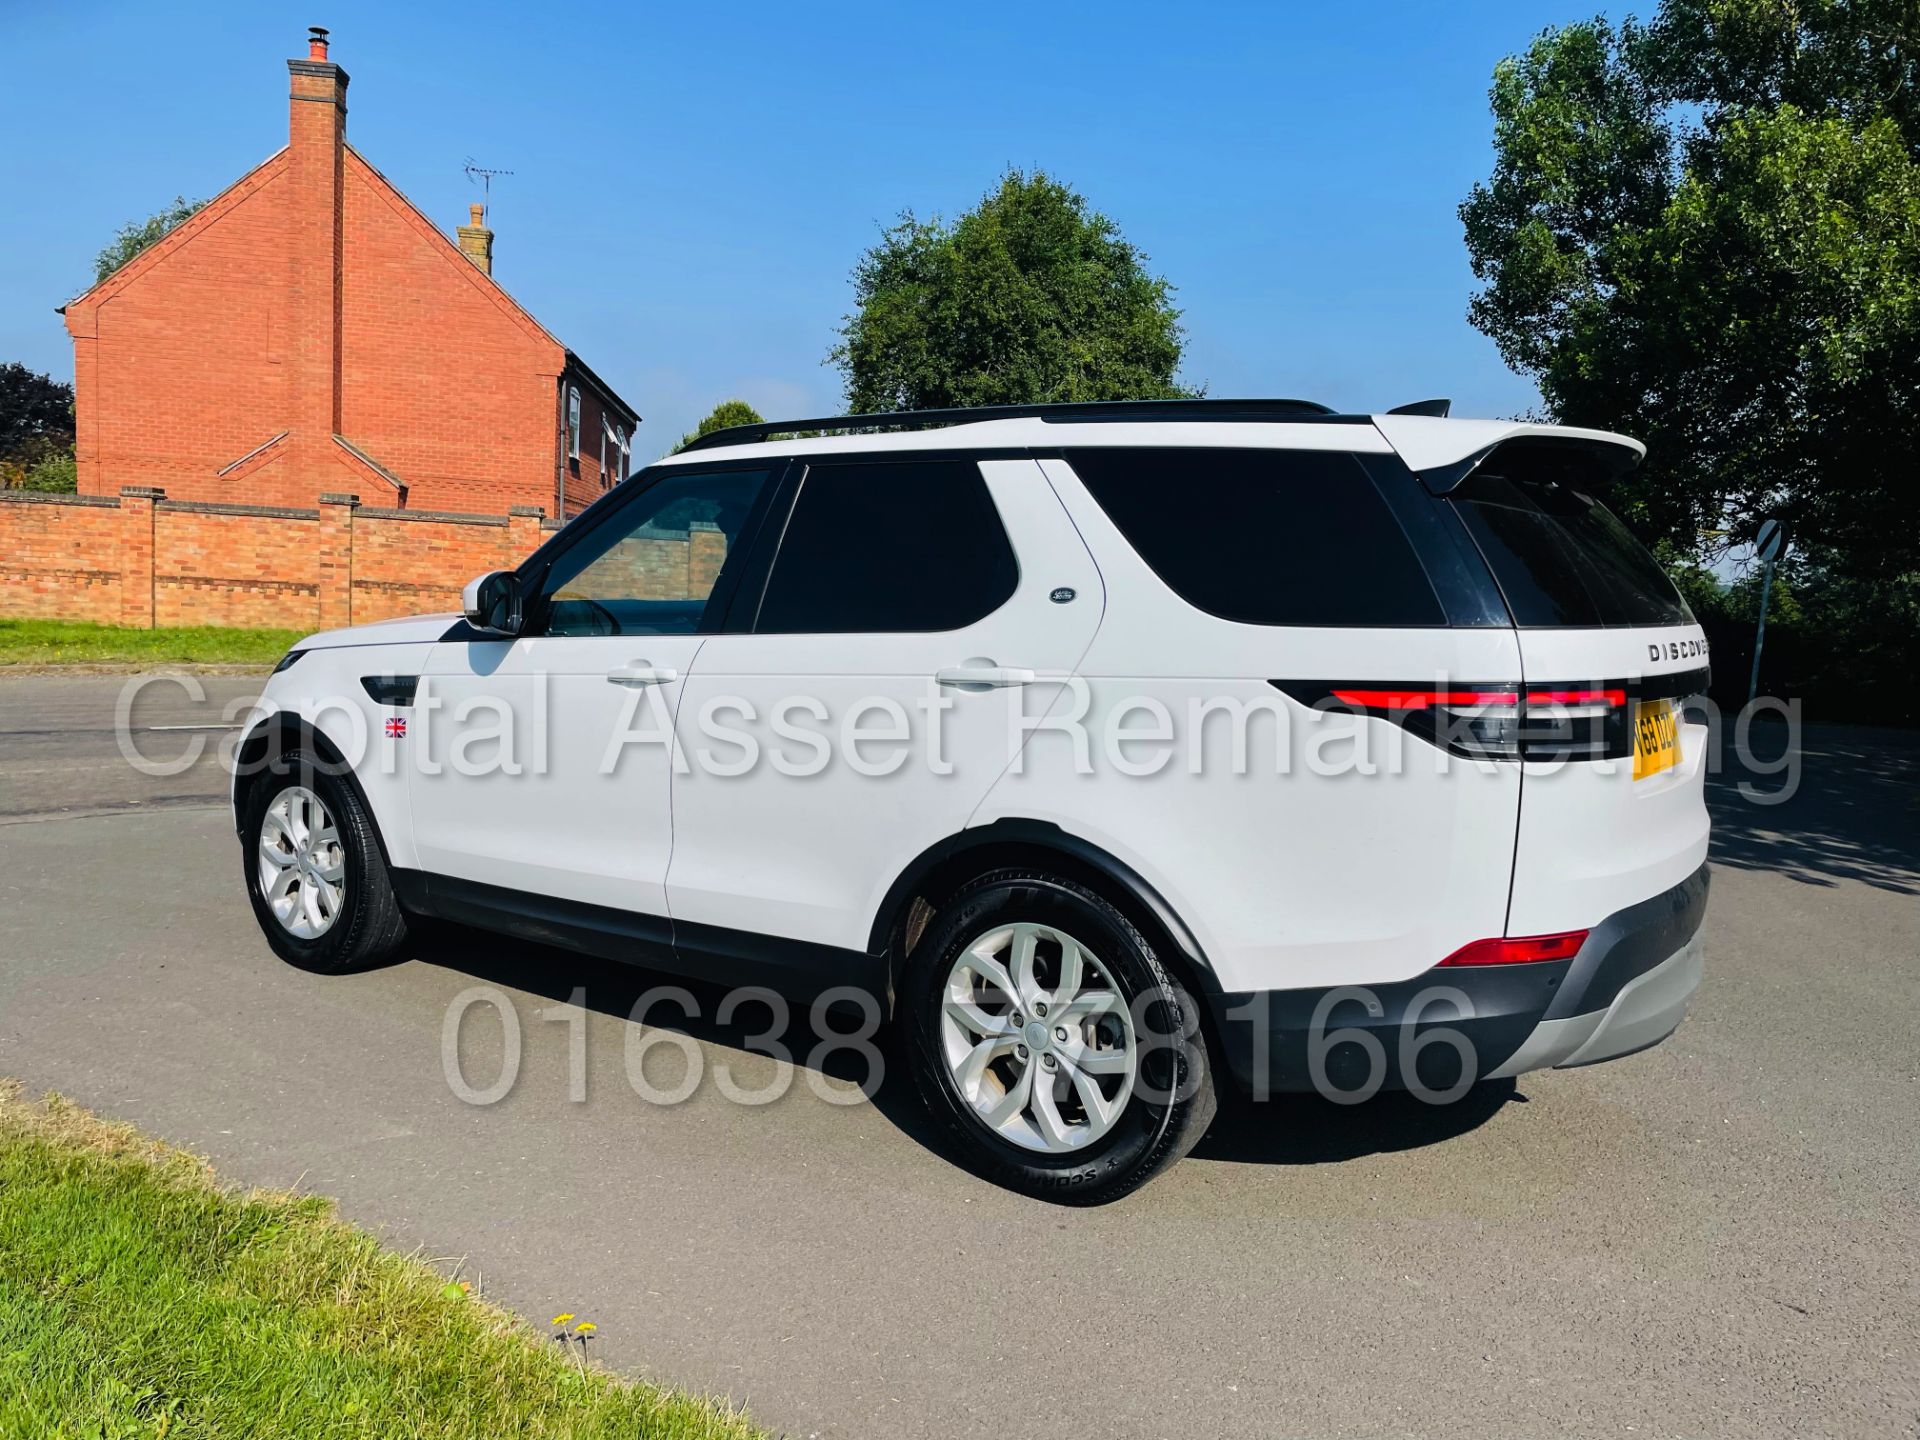 LAND ROVER DISCOVERY 5 *SE EDITION* SUV (2019 - EURO 6) '3.0 TD6 -306 BHP- 8 SPEED AUTO' *HUGE SPEC* - Image 9 of 47